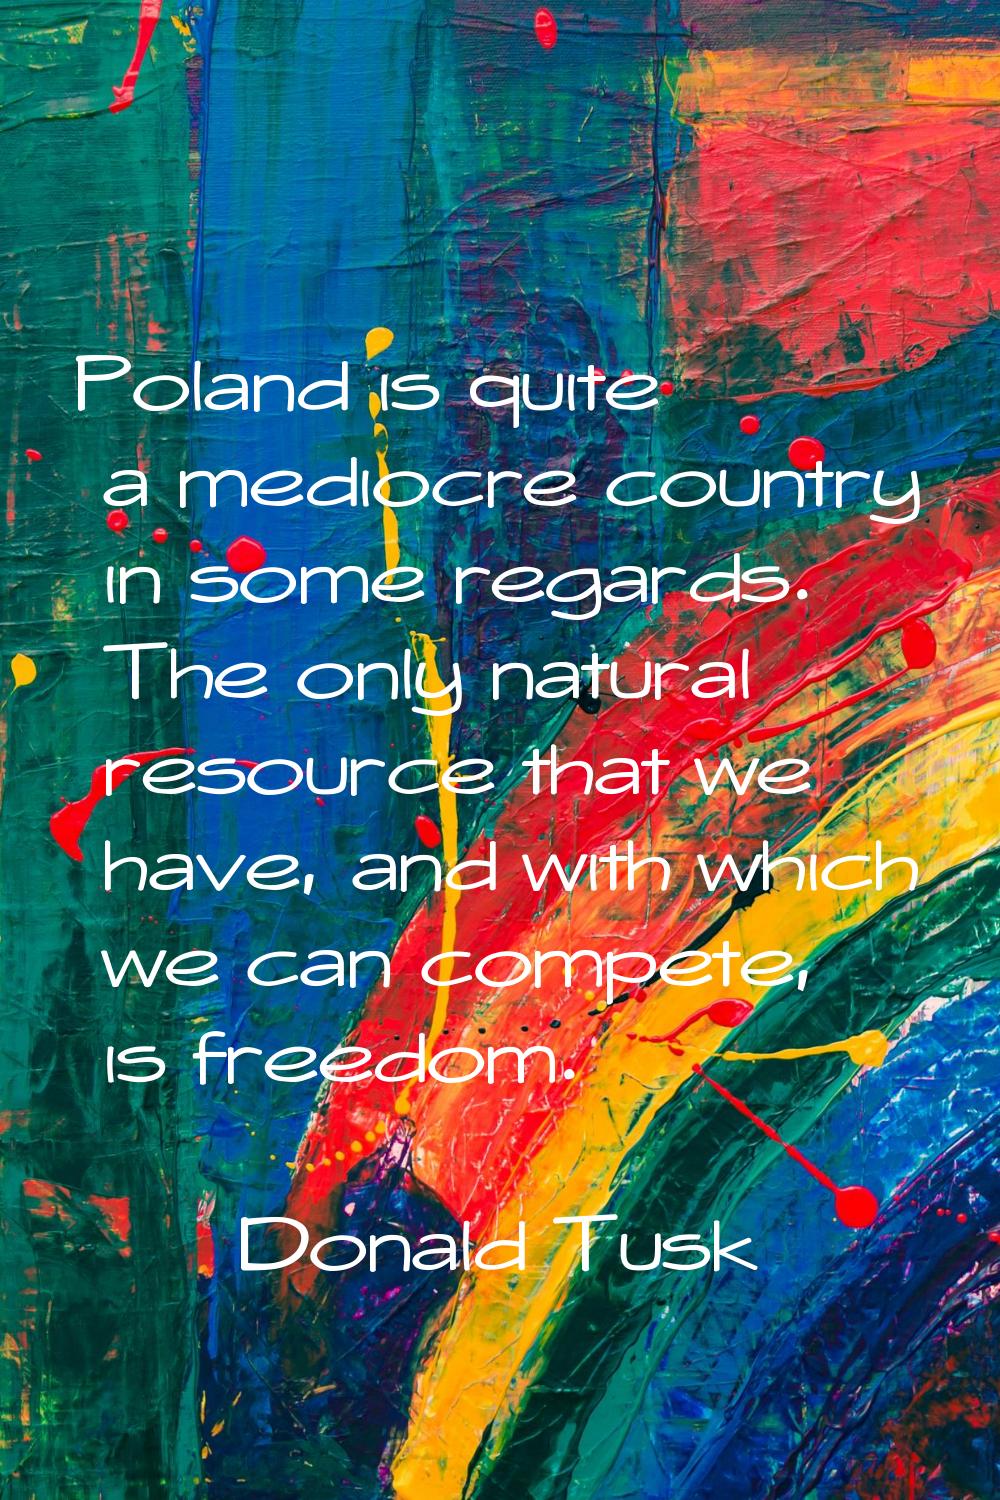 Poland is quite a mediocre country in some regards. The only natural resource that we have, and wit